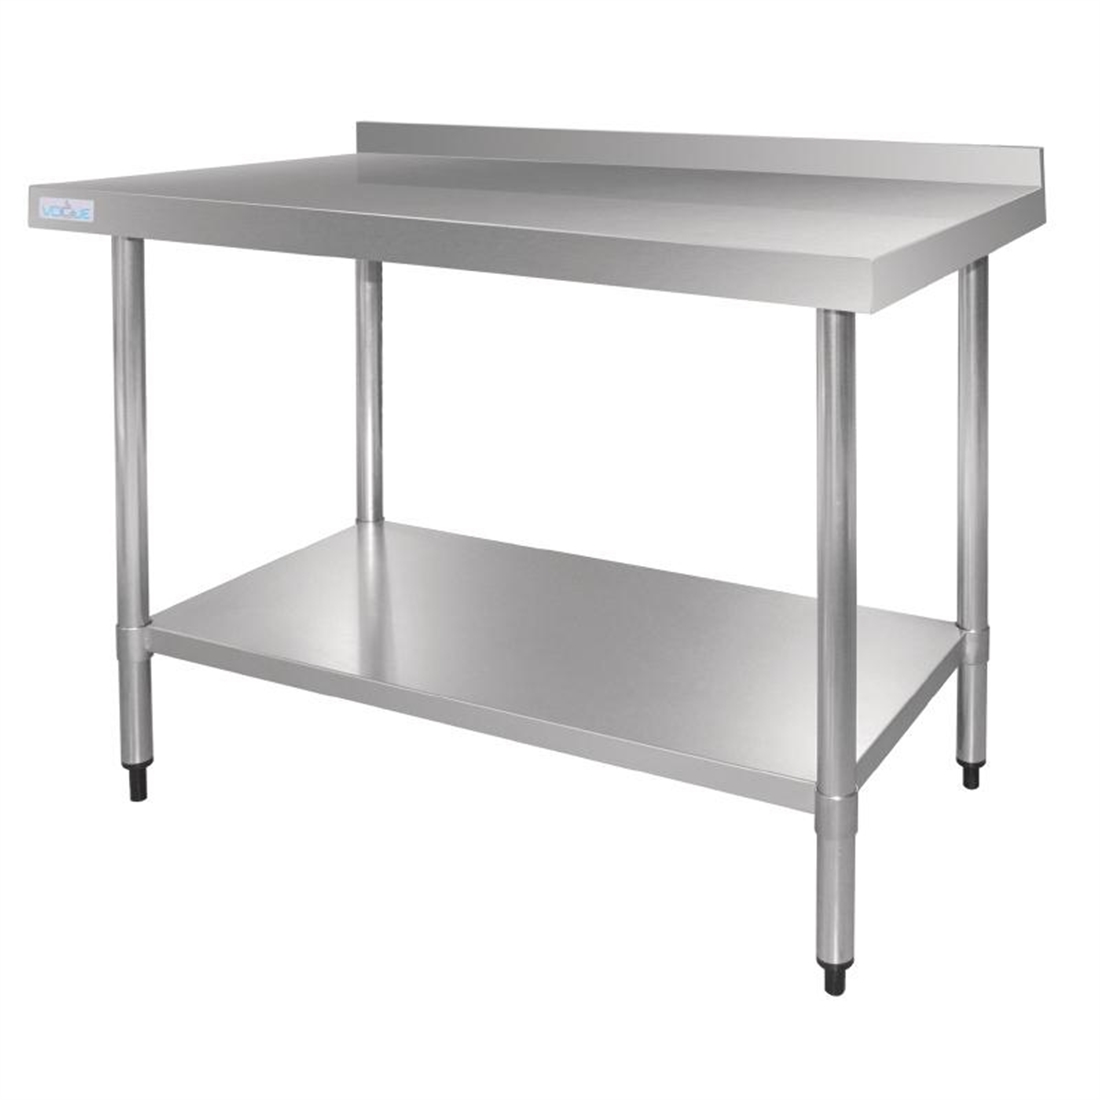 Vogue Stainless Steel Table with Upstand 1200mm